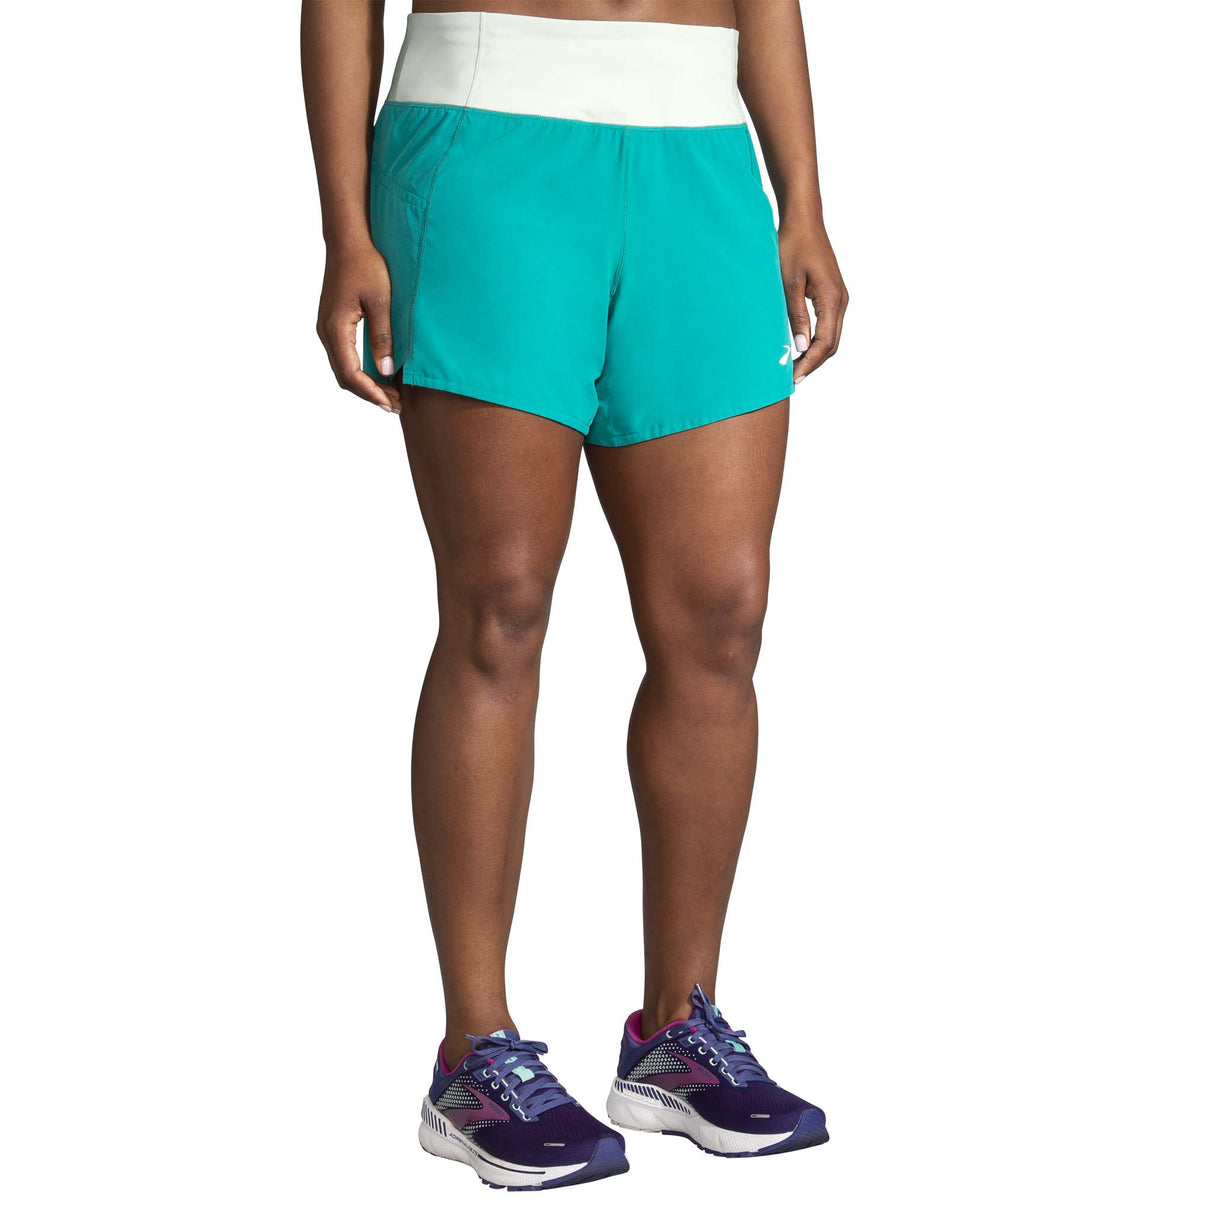 Brooks Chaser 5 pouces shorts course femme face -Nile Green/Cool Mint